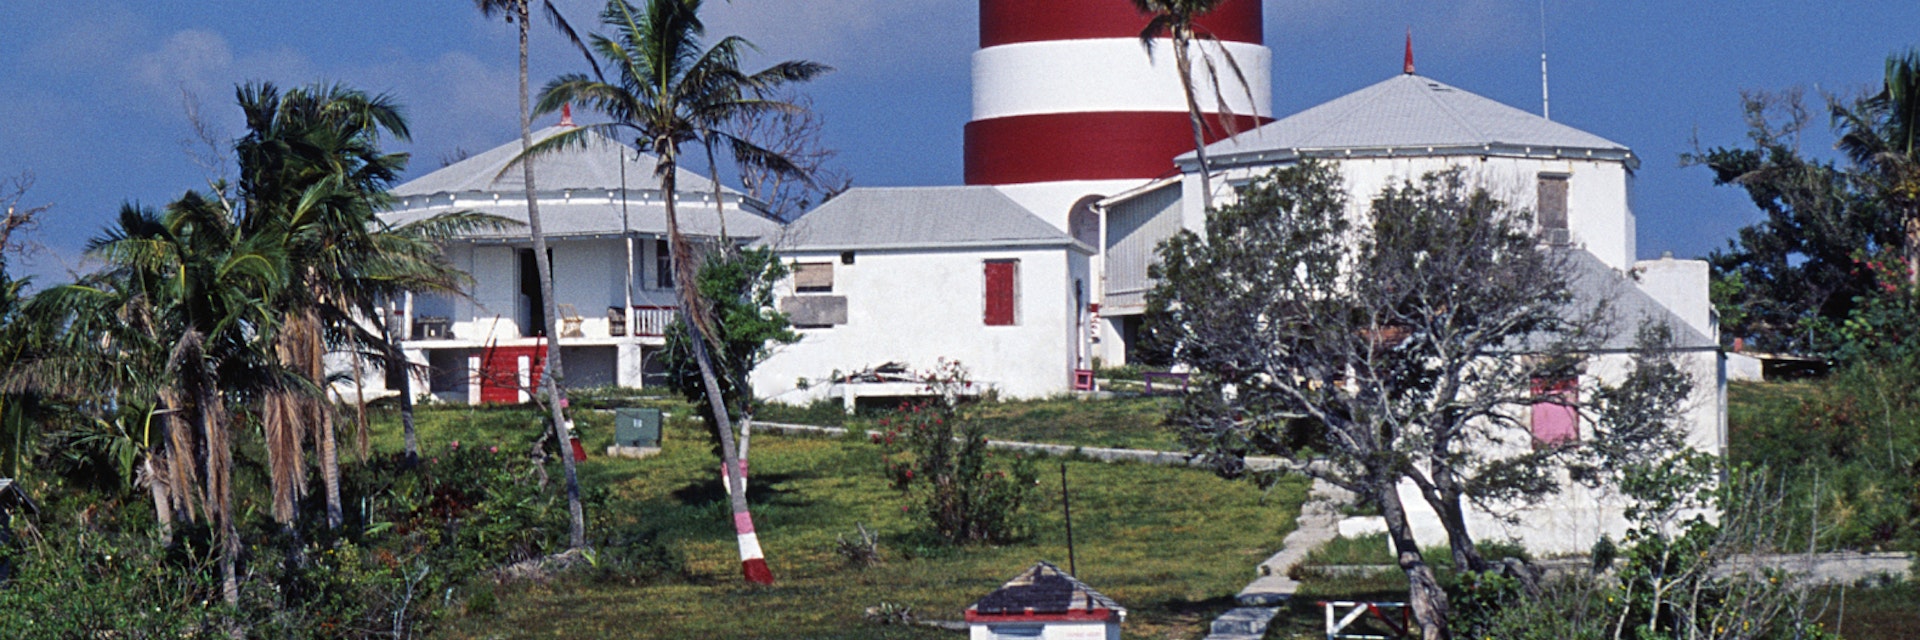 Bahamas. Lighthouse at Hope Town on the island of Abaco.